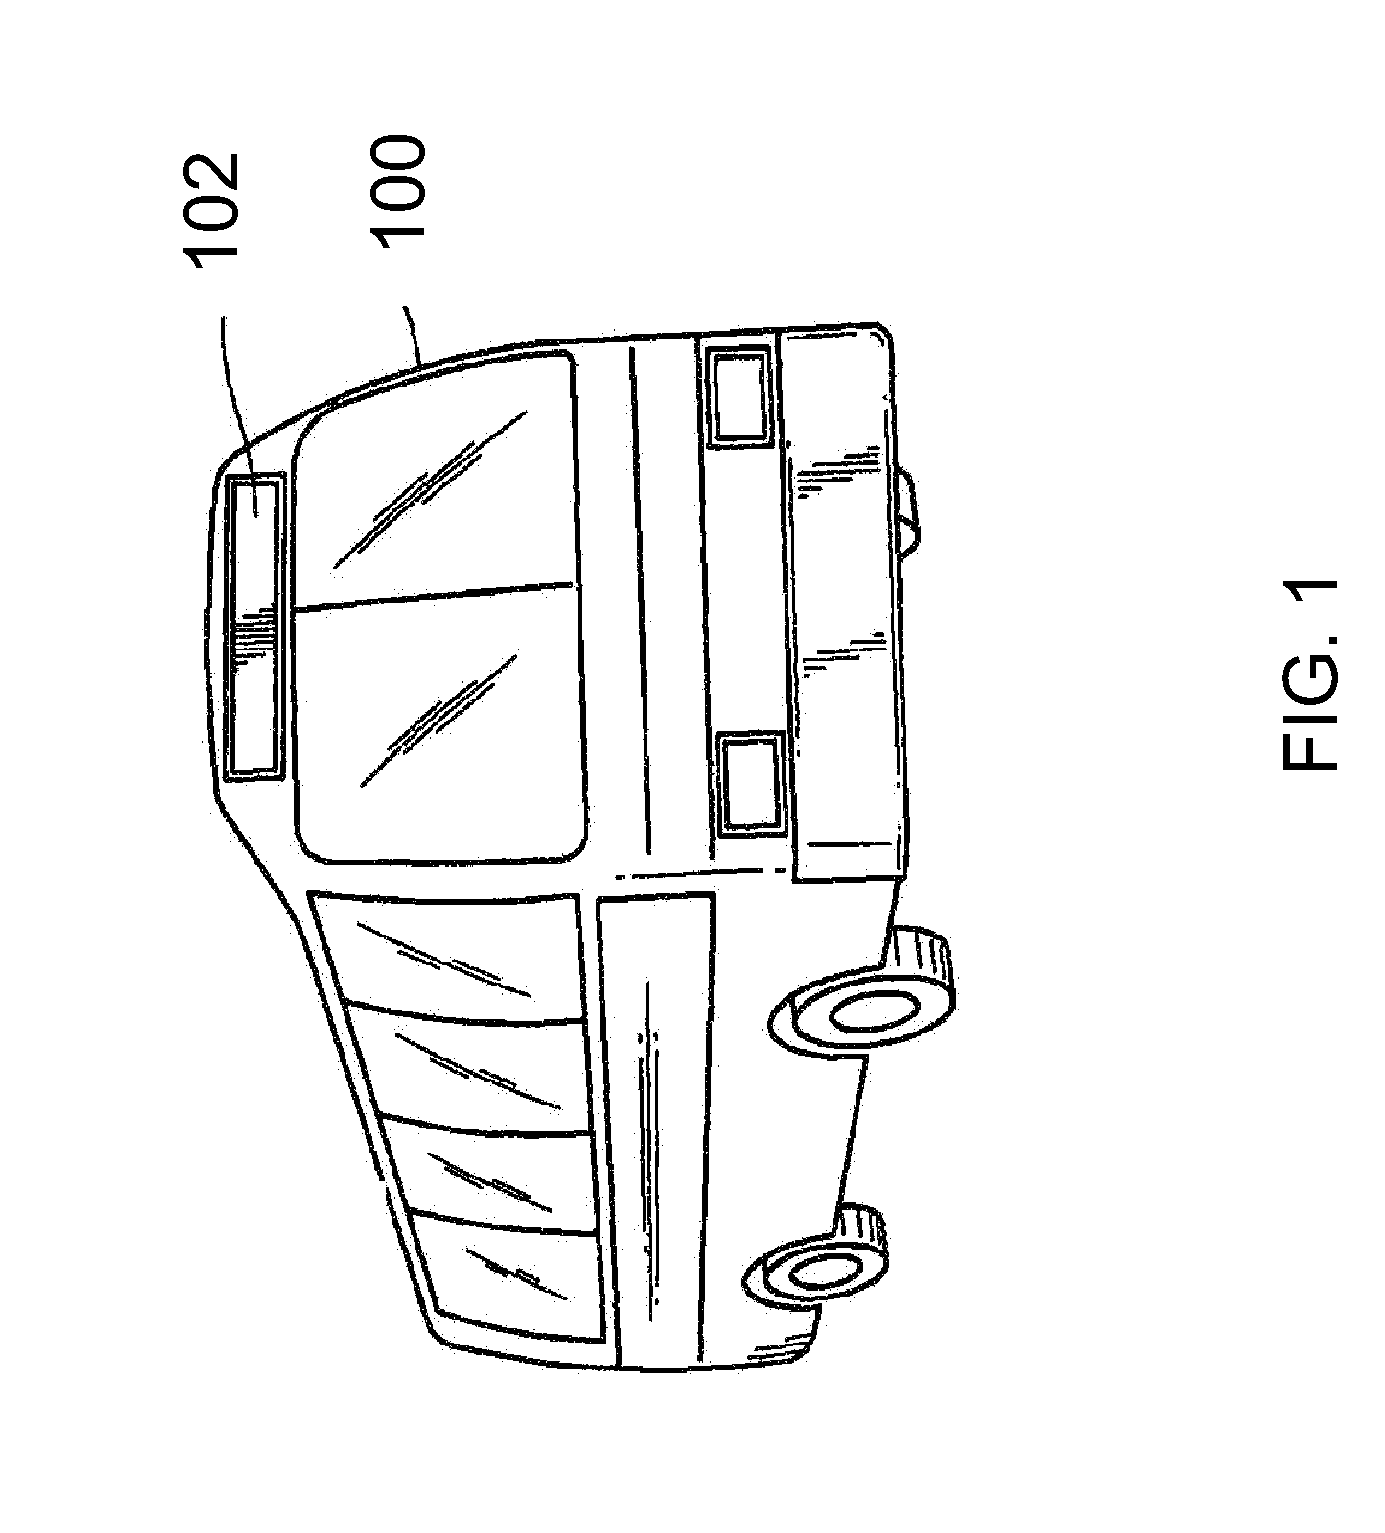 System and method for monitoring a signage system of a transit vehicle